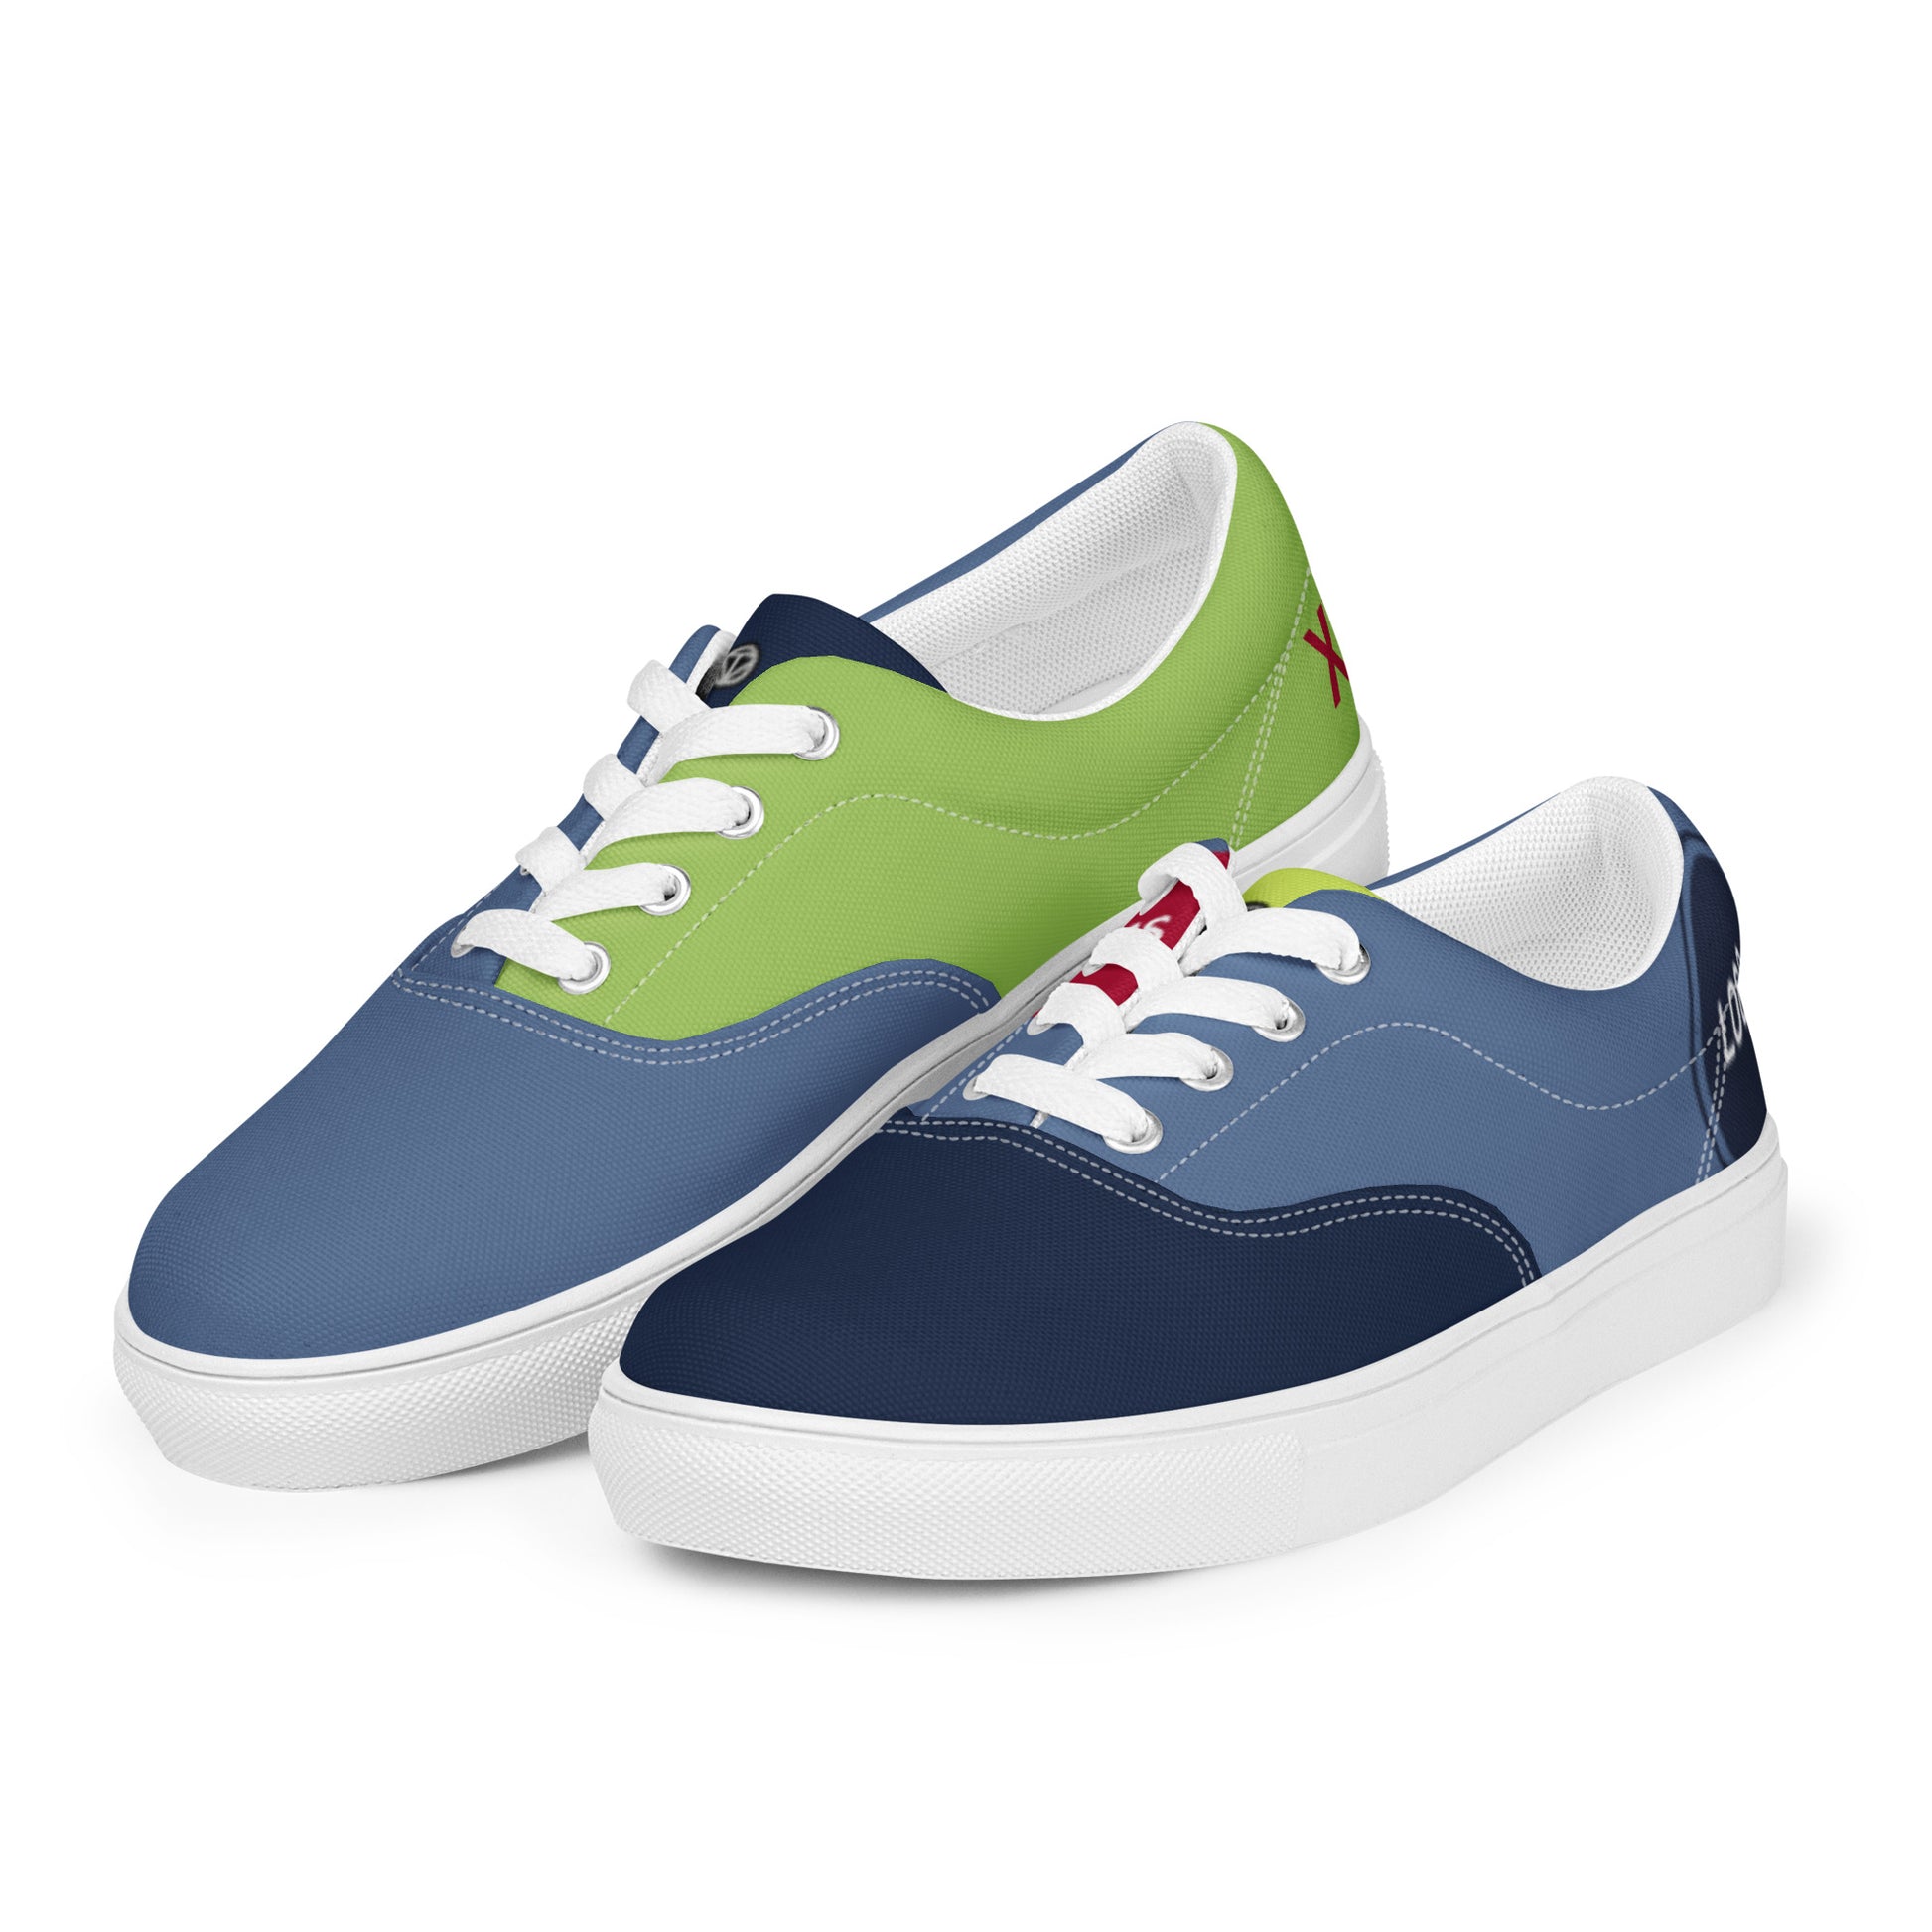 TIME OF VIBES - Women’s lace-up canvas shoes CORPORATE - €109.00